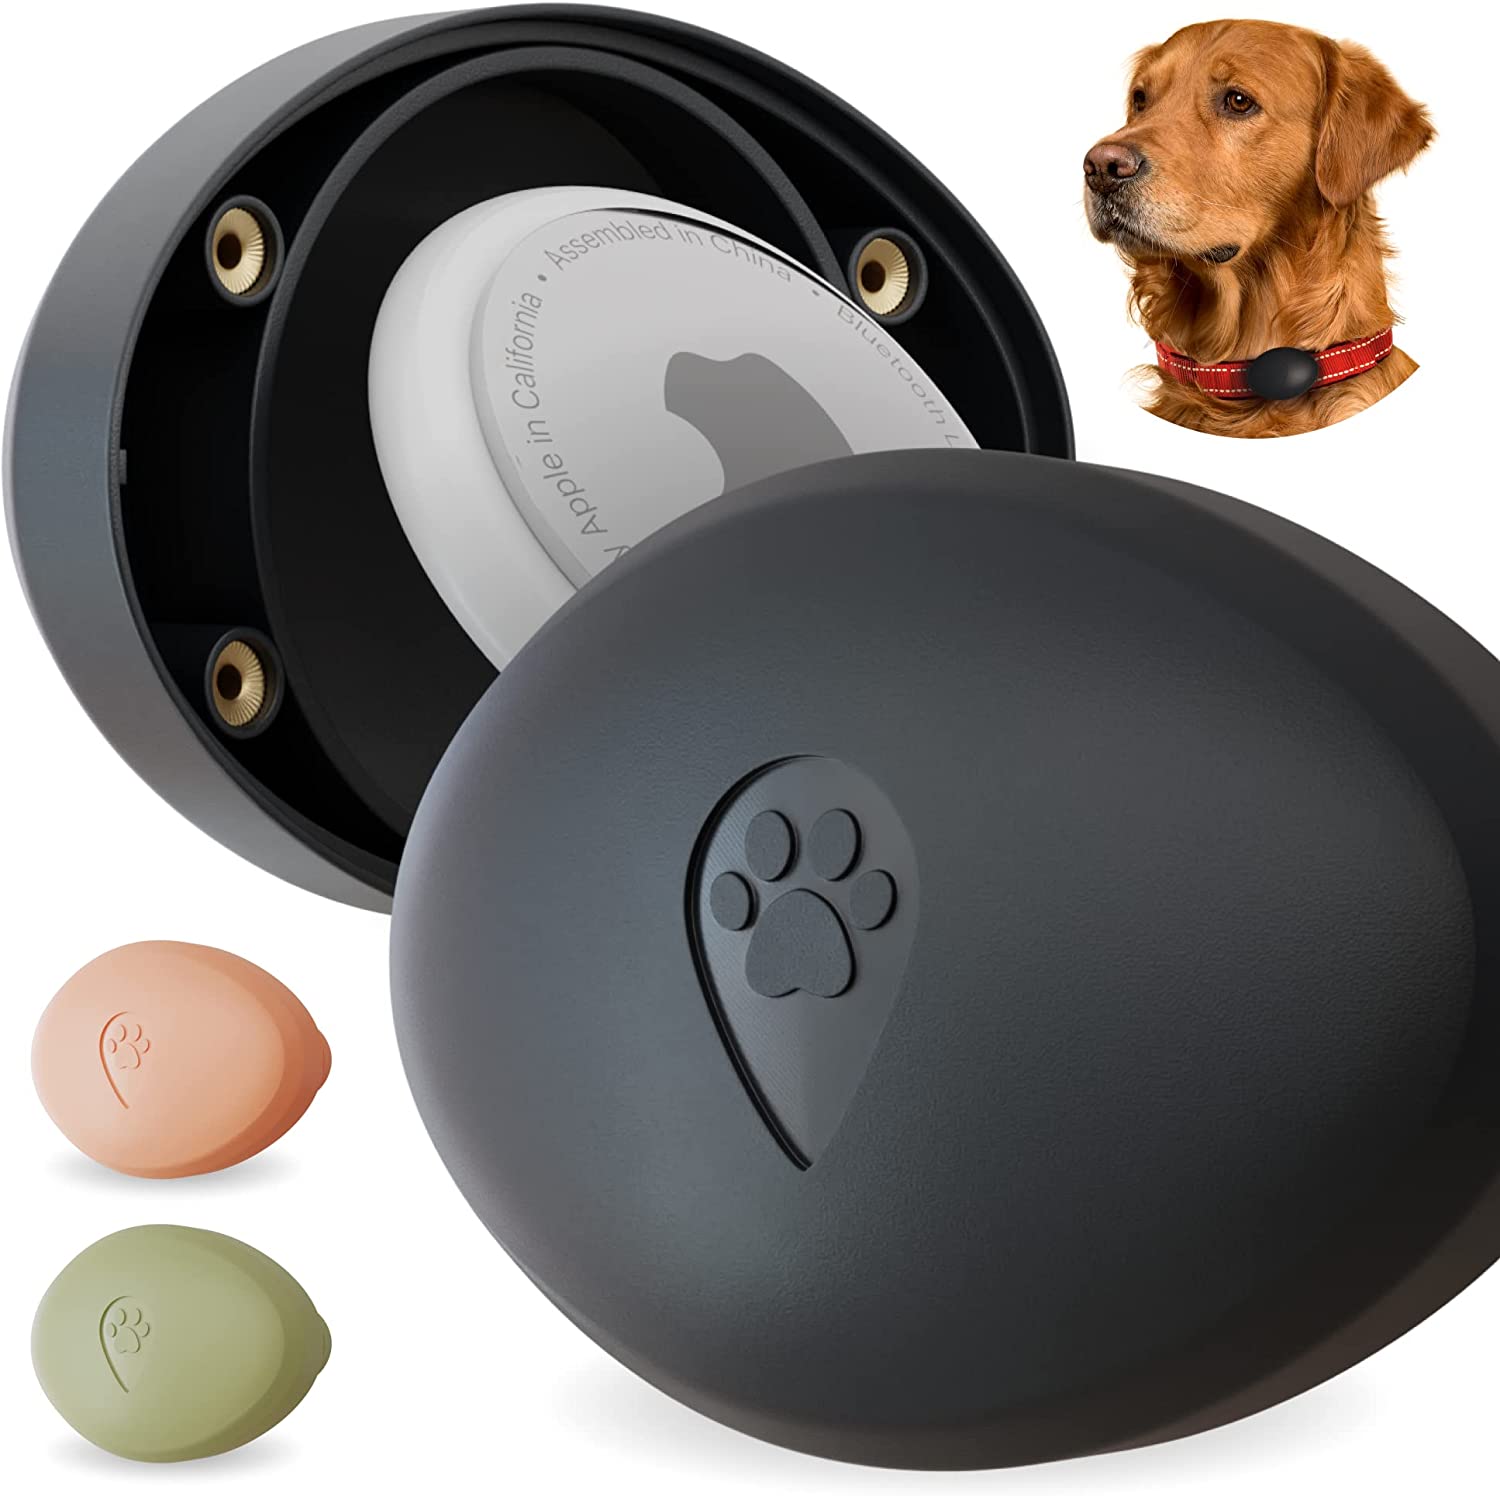 Why doesn't Apple want you to track your dog with an AirTag?